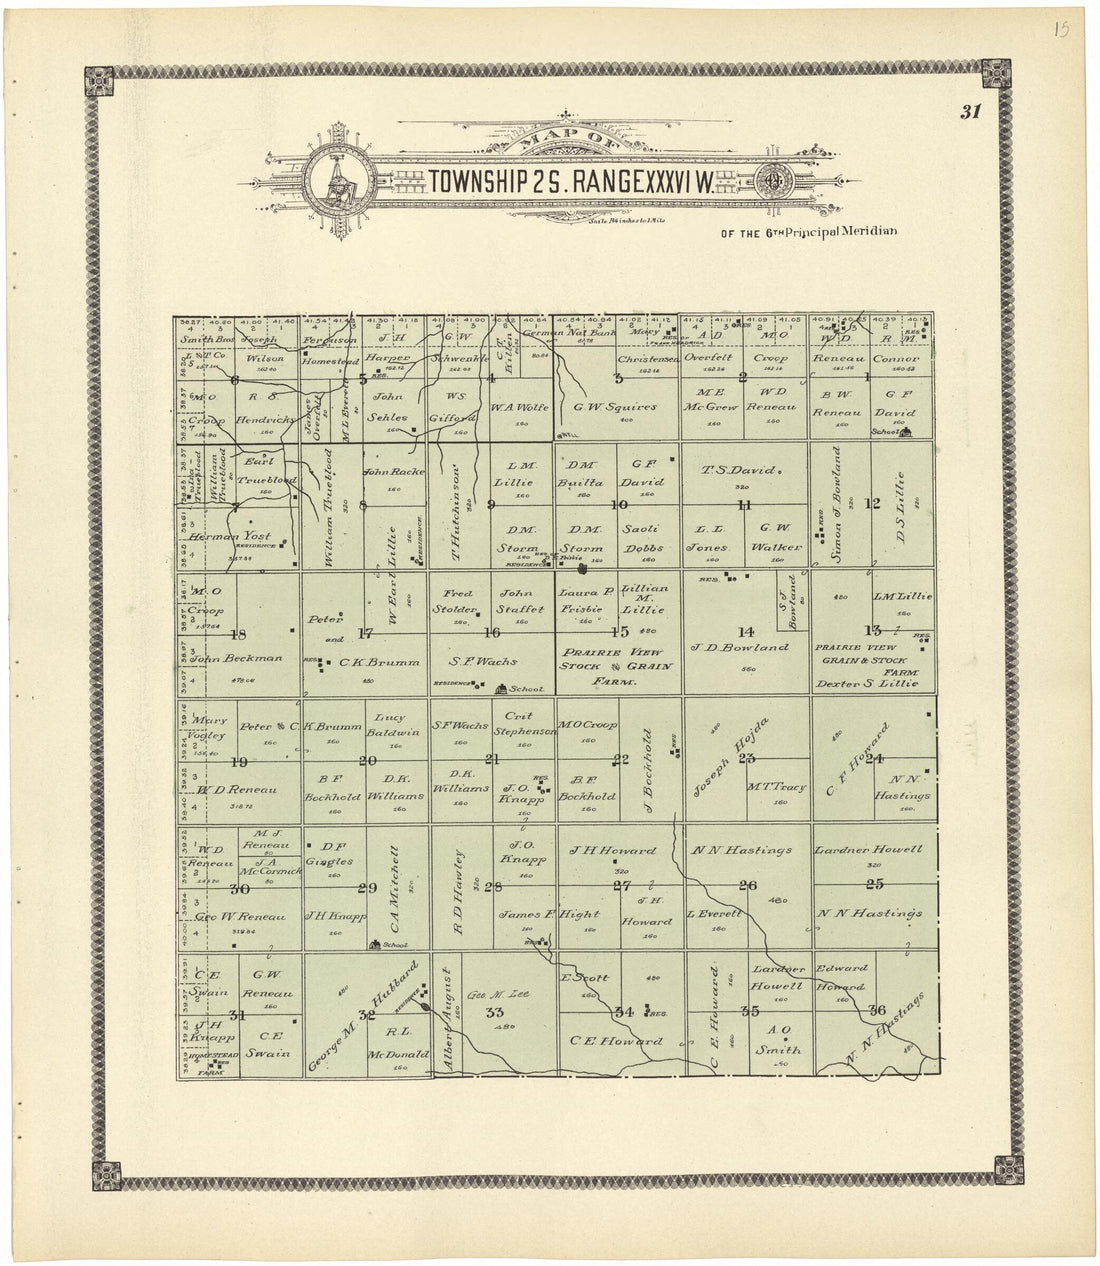 This old map of Map of Township 2 S. Range XXXVI W. from Standard Atlas of Rawlins County, Kansas from 1906 was created by  Geo. A. Ogle &amp; Co in 1906